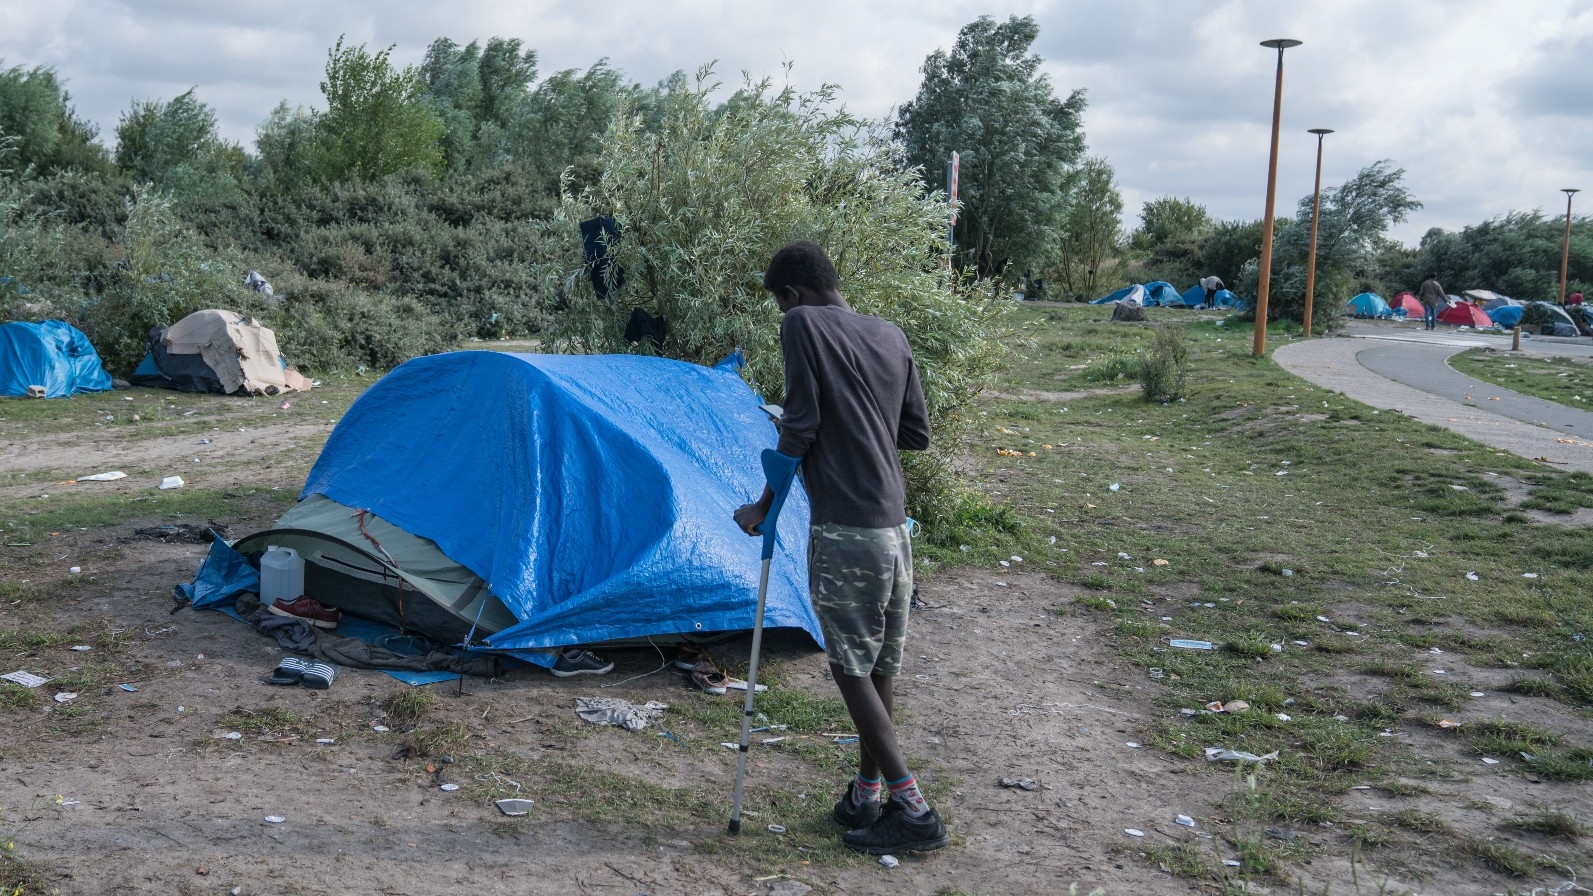 An injured man enroute to the UK walks towards a tent outside Calais, northern France (MEE/Abdul Saboor)